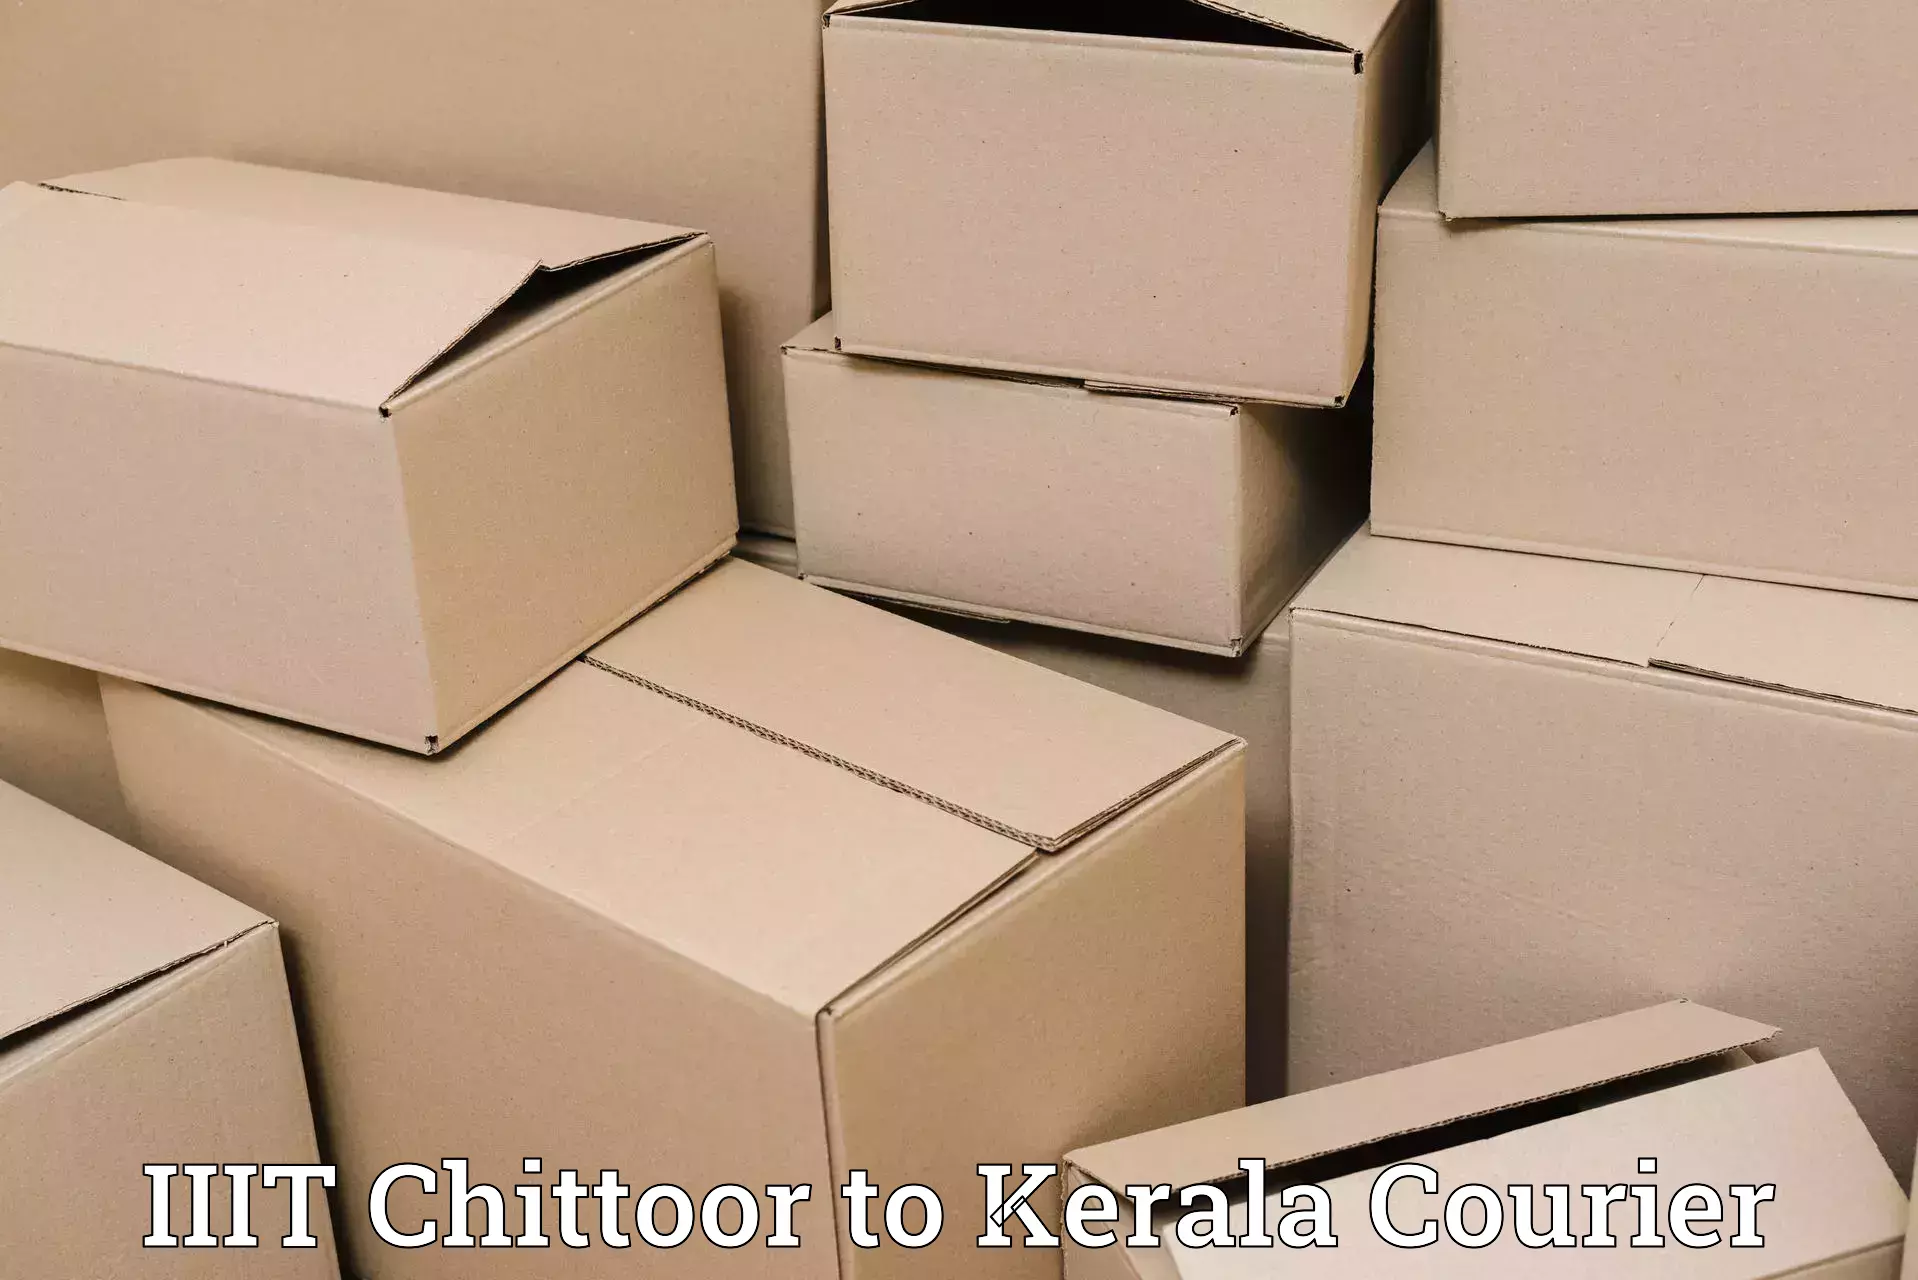 Holiday shipping services IIIT Chittoor to Kakkur